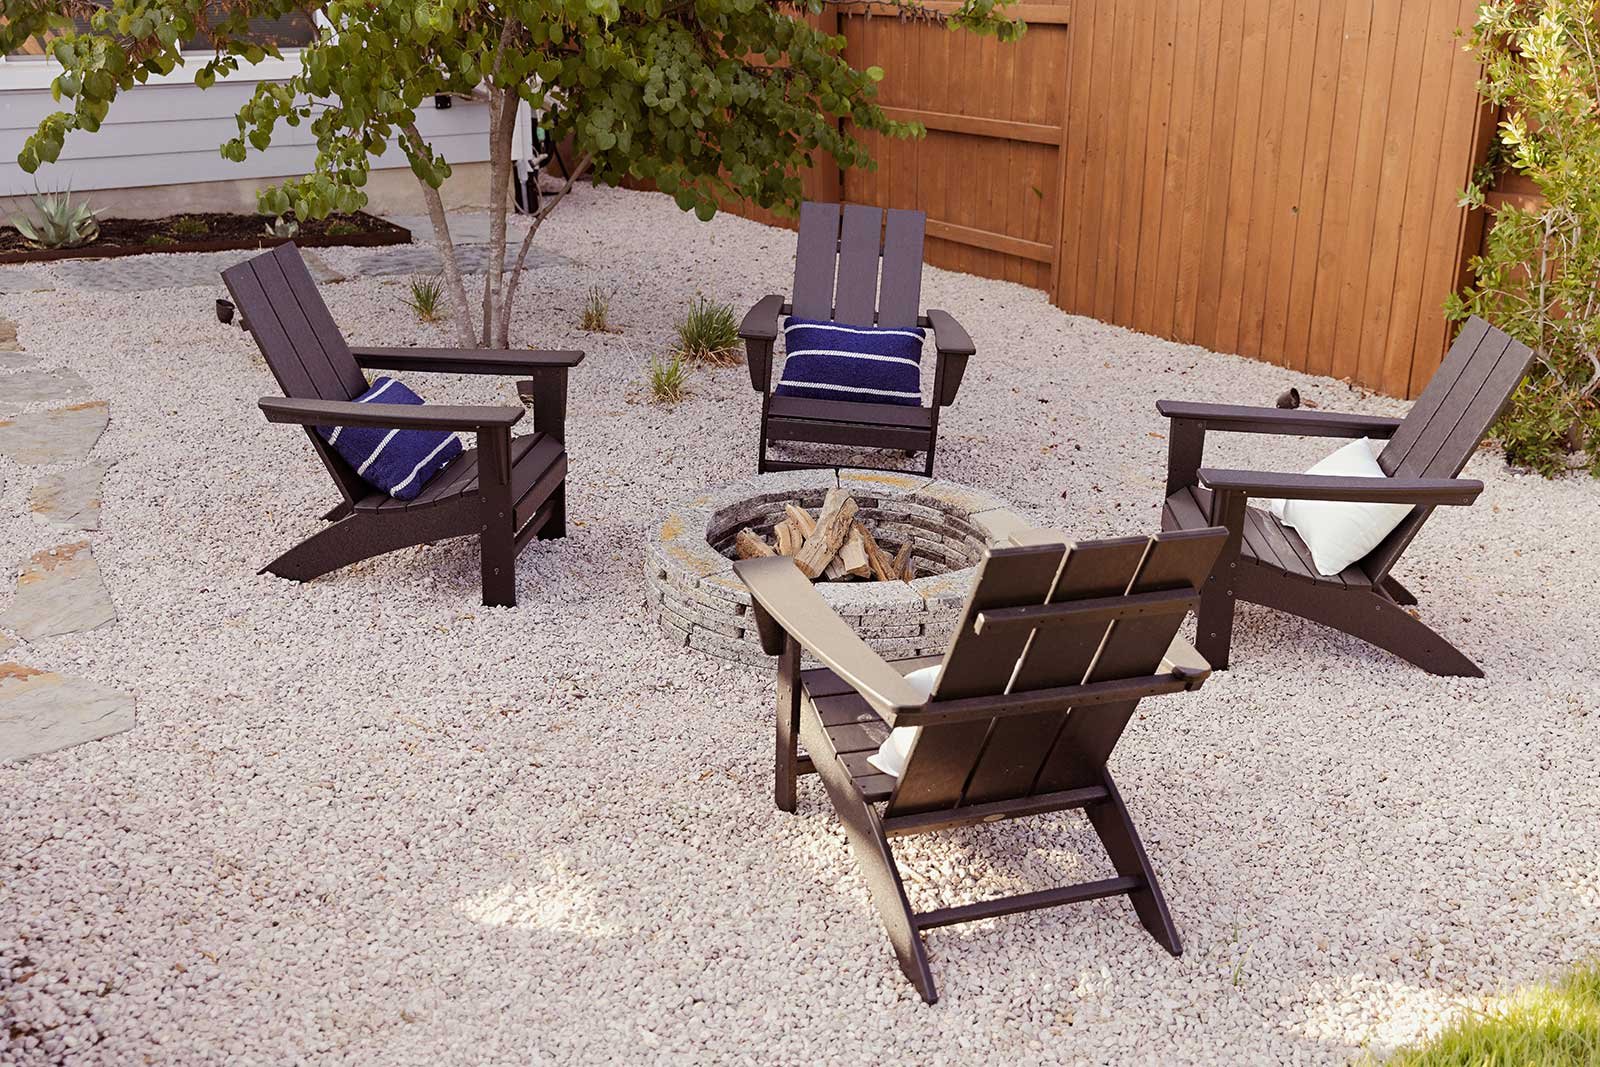 Crunchy gravel, comfy chairs, and an understory tree make for a cozy, rustic fire pit area. The zone adds value by offering a distinct experience from other gathering spaces in the yard.